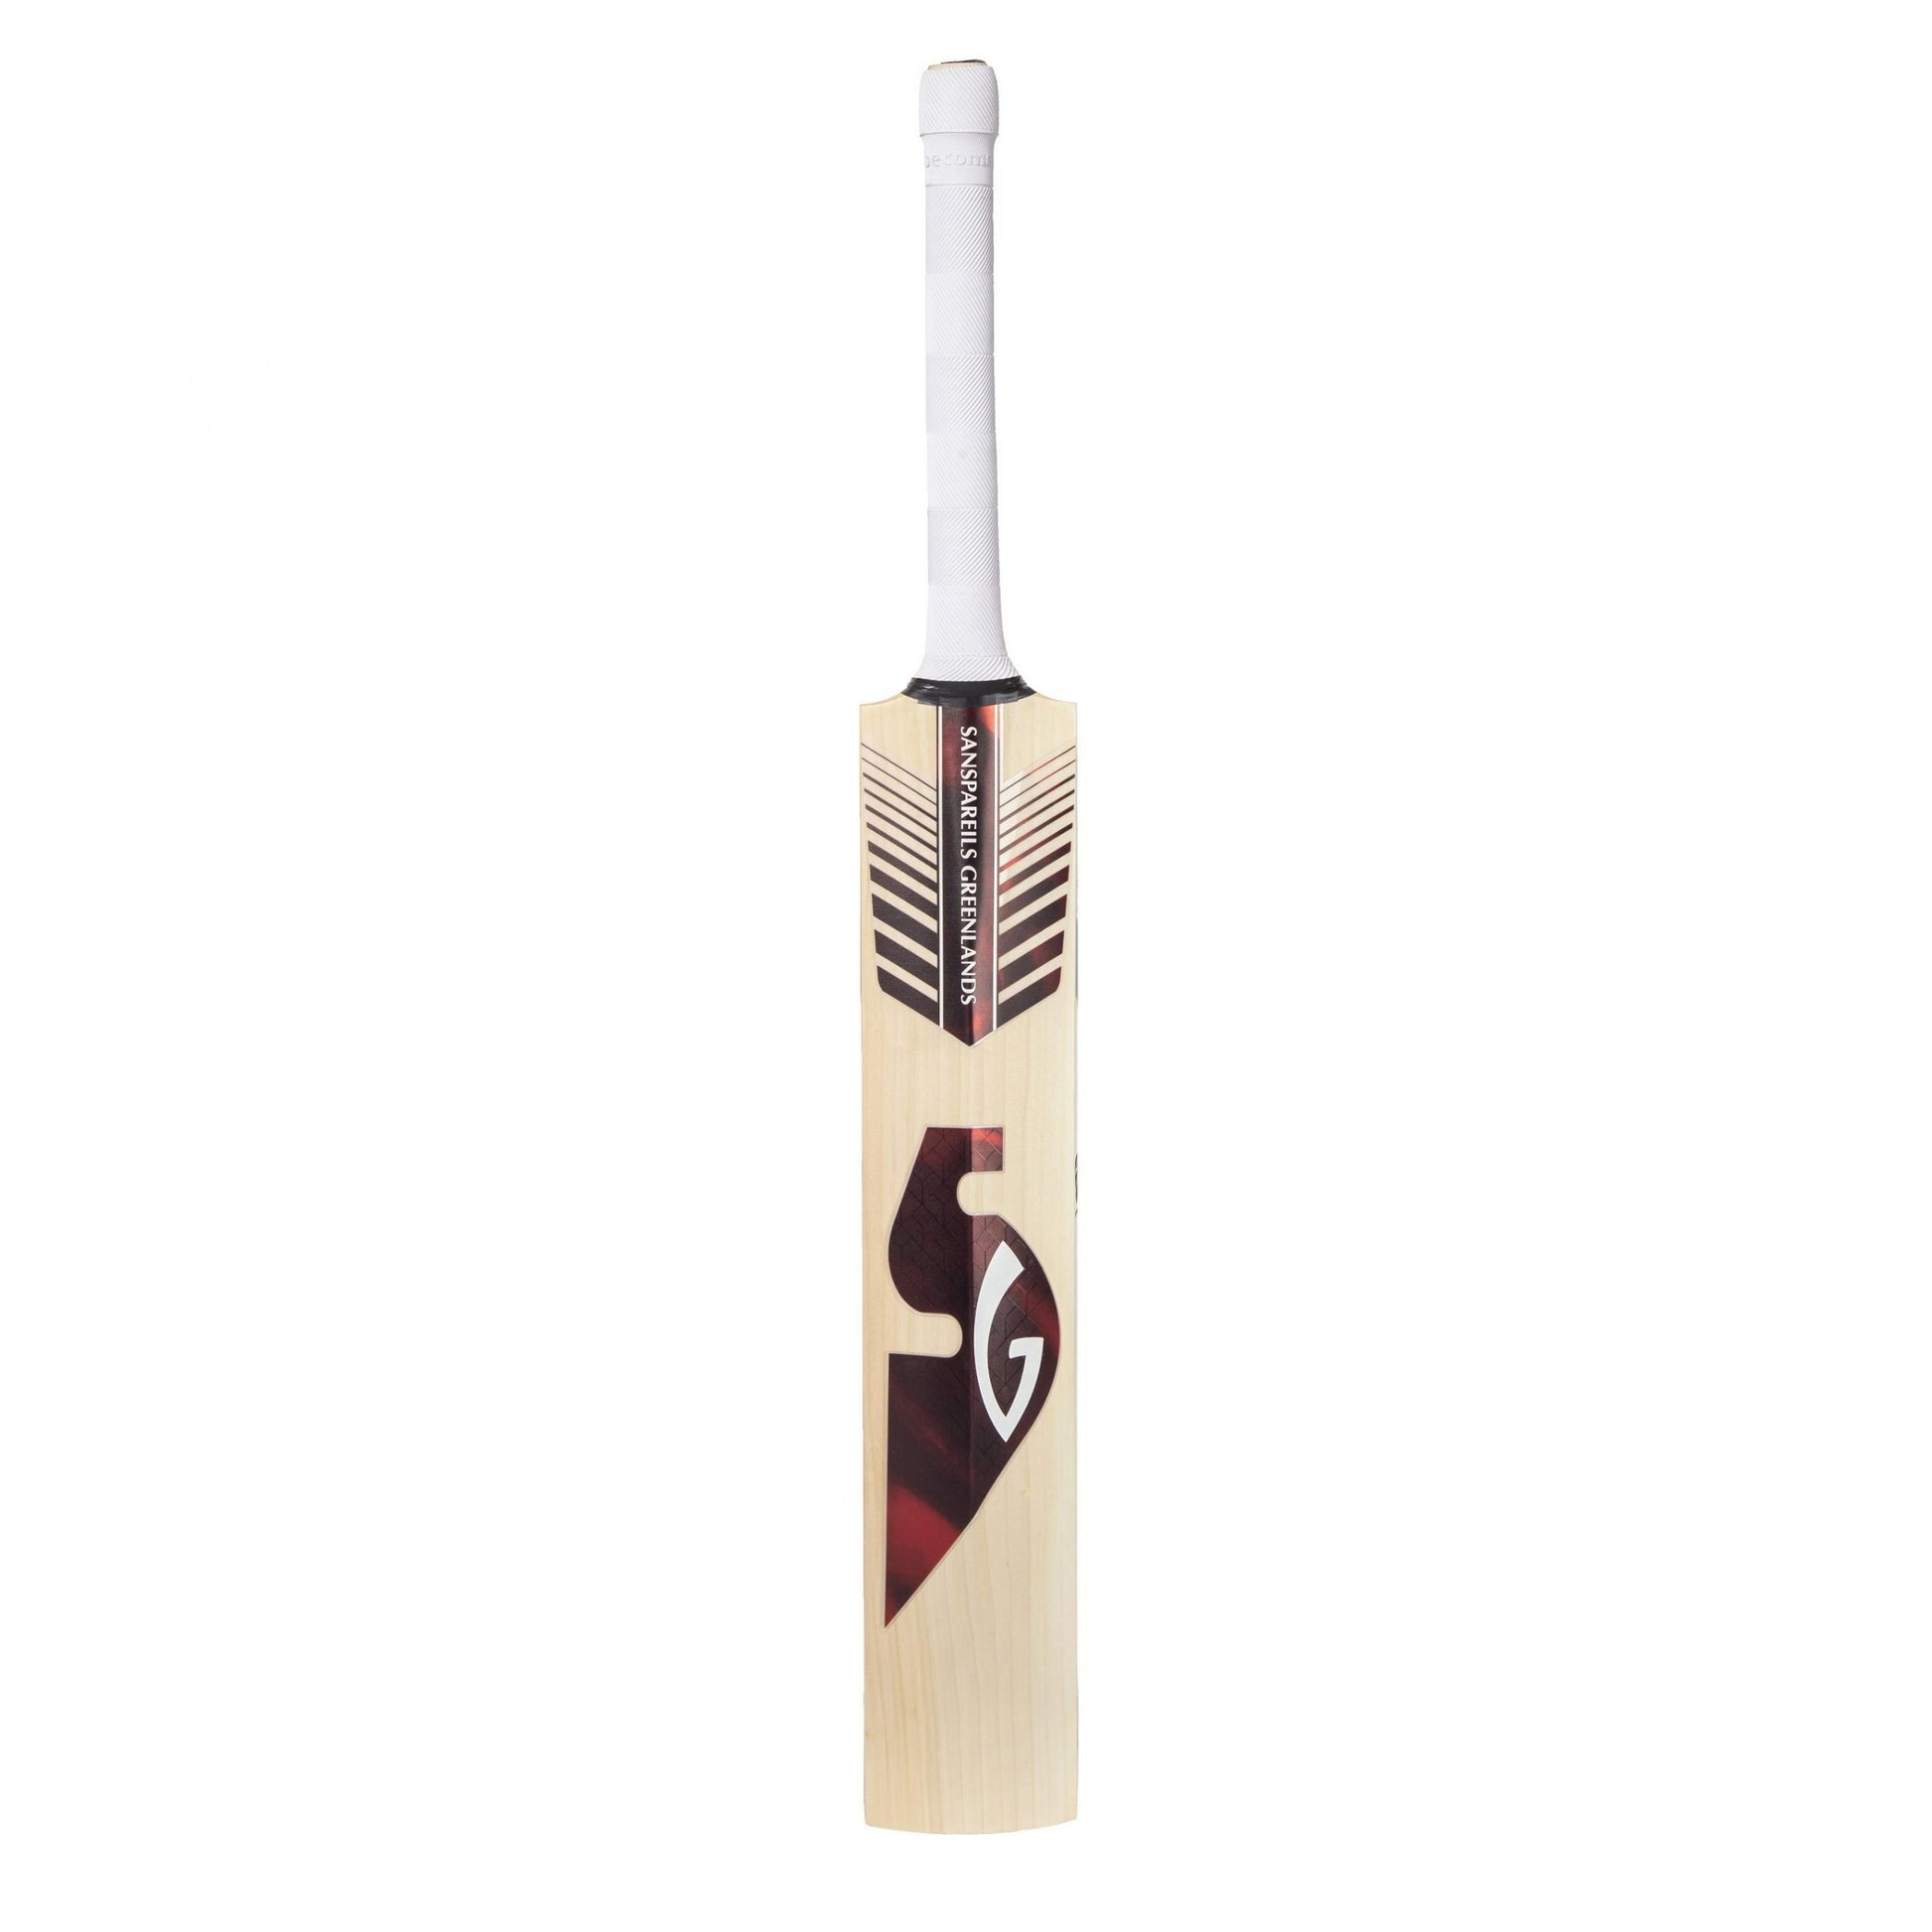 SG Sunny Tonny Classic - Grade 1 Worlds Finest English Willow Cricket Bat (Leather Ball)